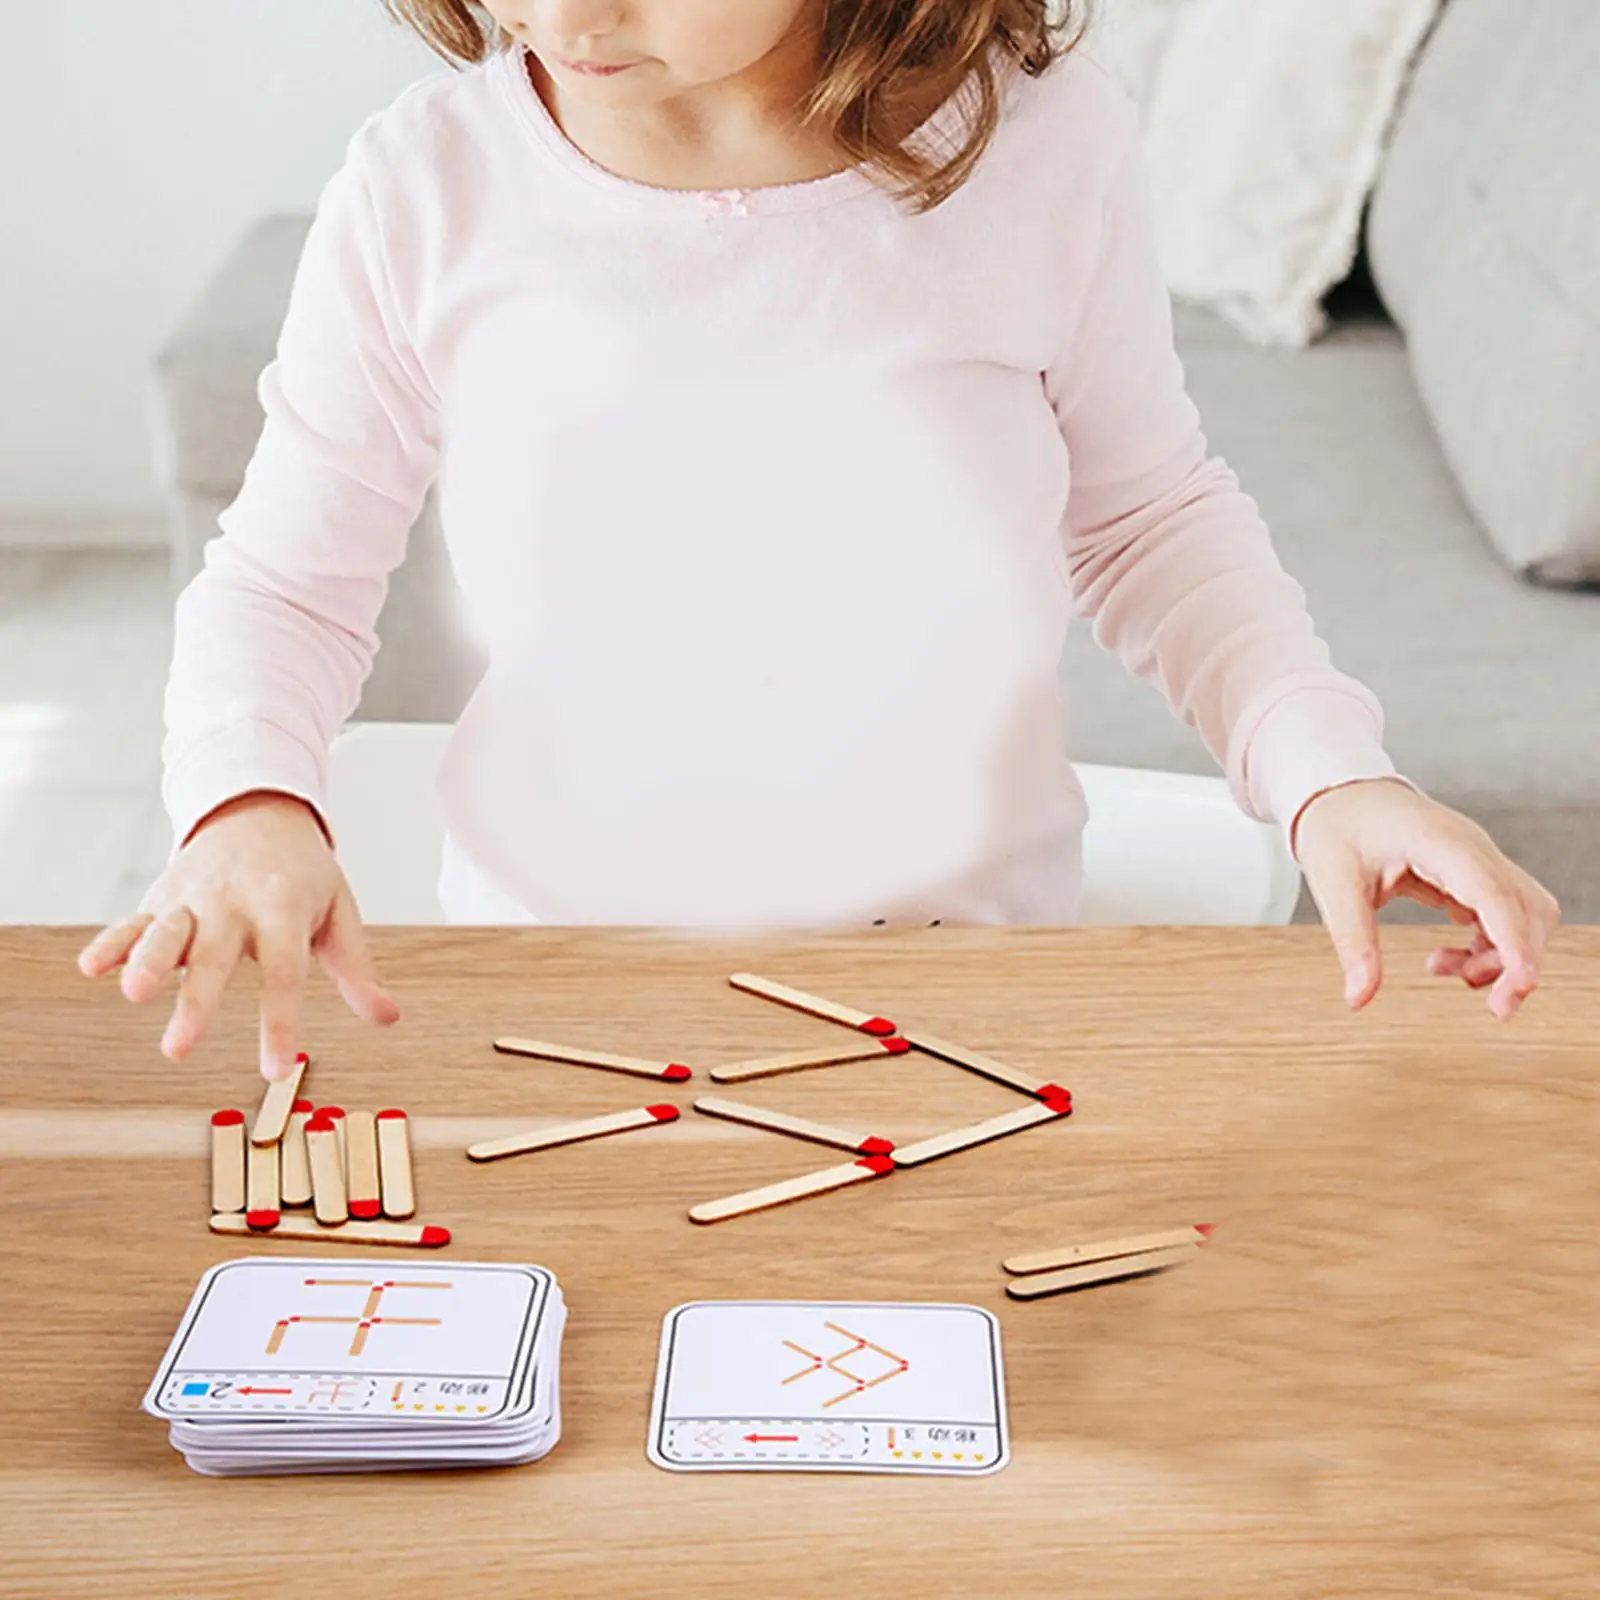 

Matchstick Puzzle Games Montessori Match Stick Educational Toy Problem Solving Math Toys IQ Brain Teaser Puzzles for Kids Age 3+